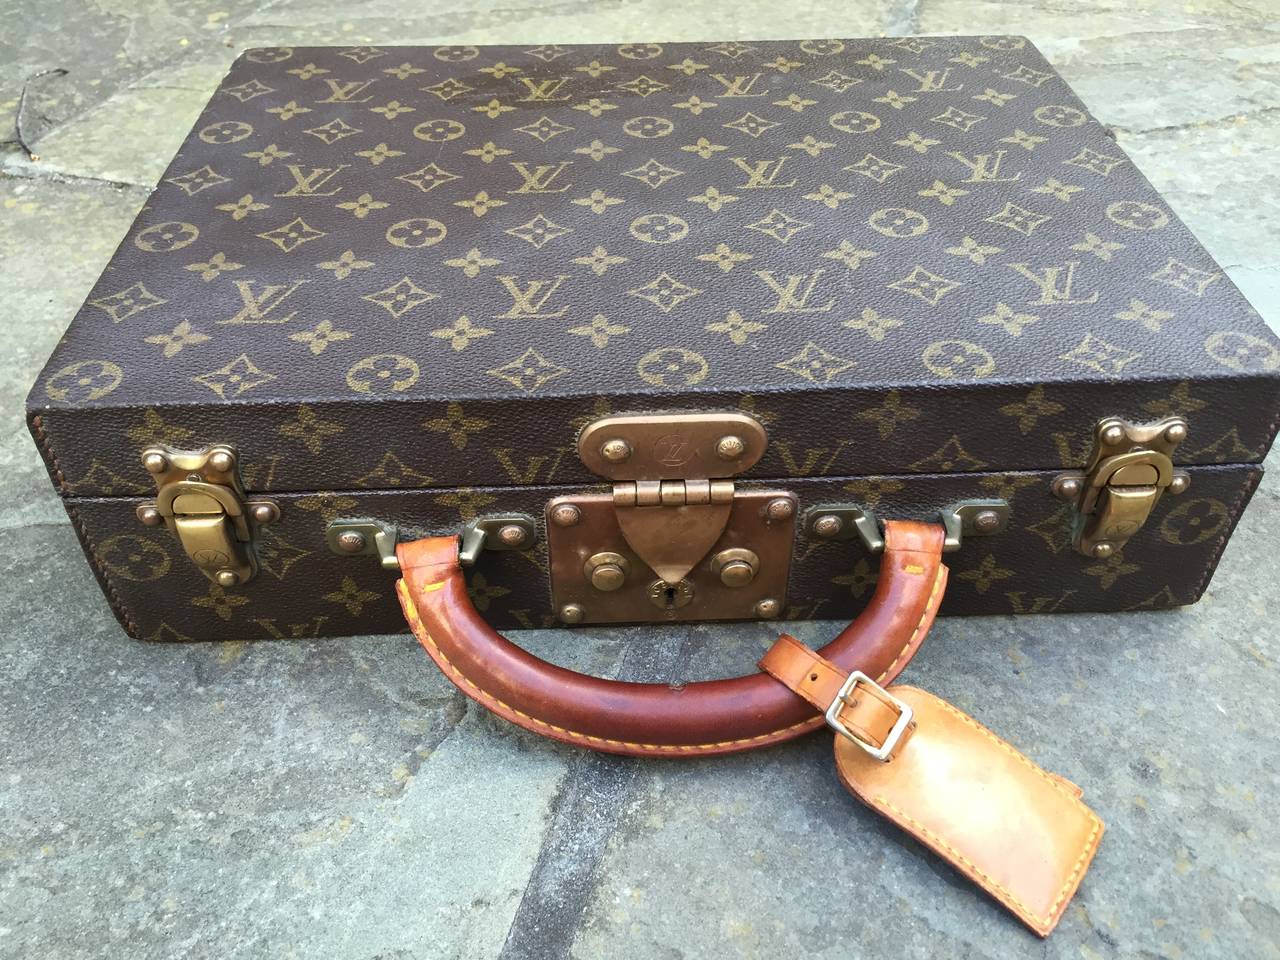 Louis Vuitton Vintage Monogram Travel Case for Fine Jewelry at 1stdibs